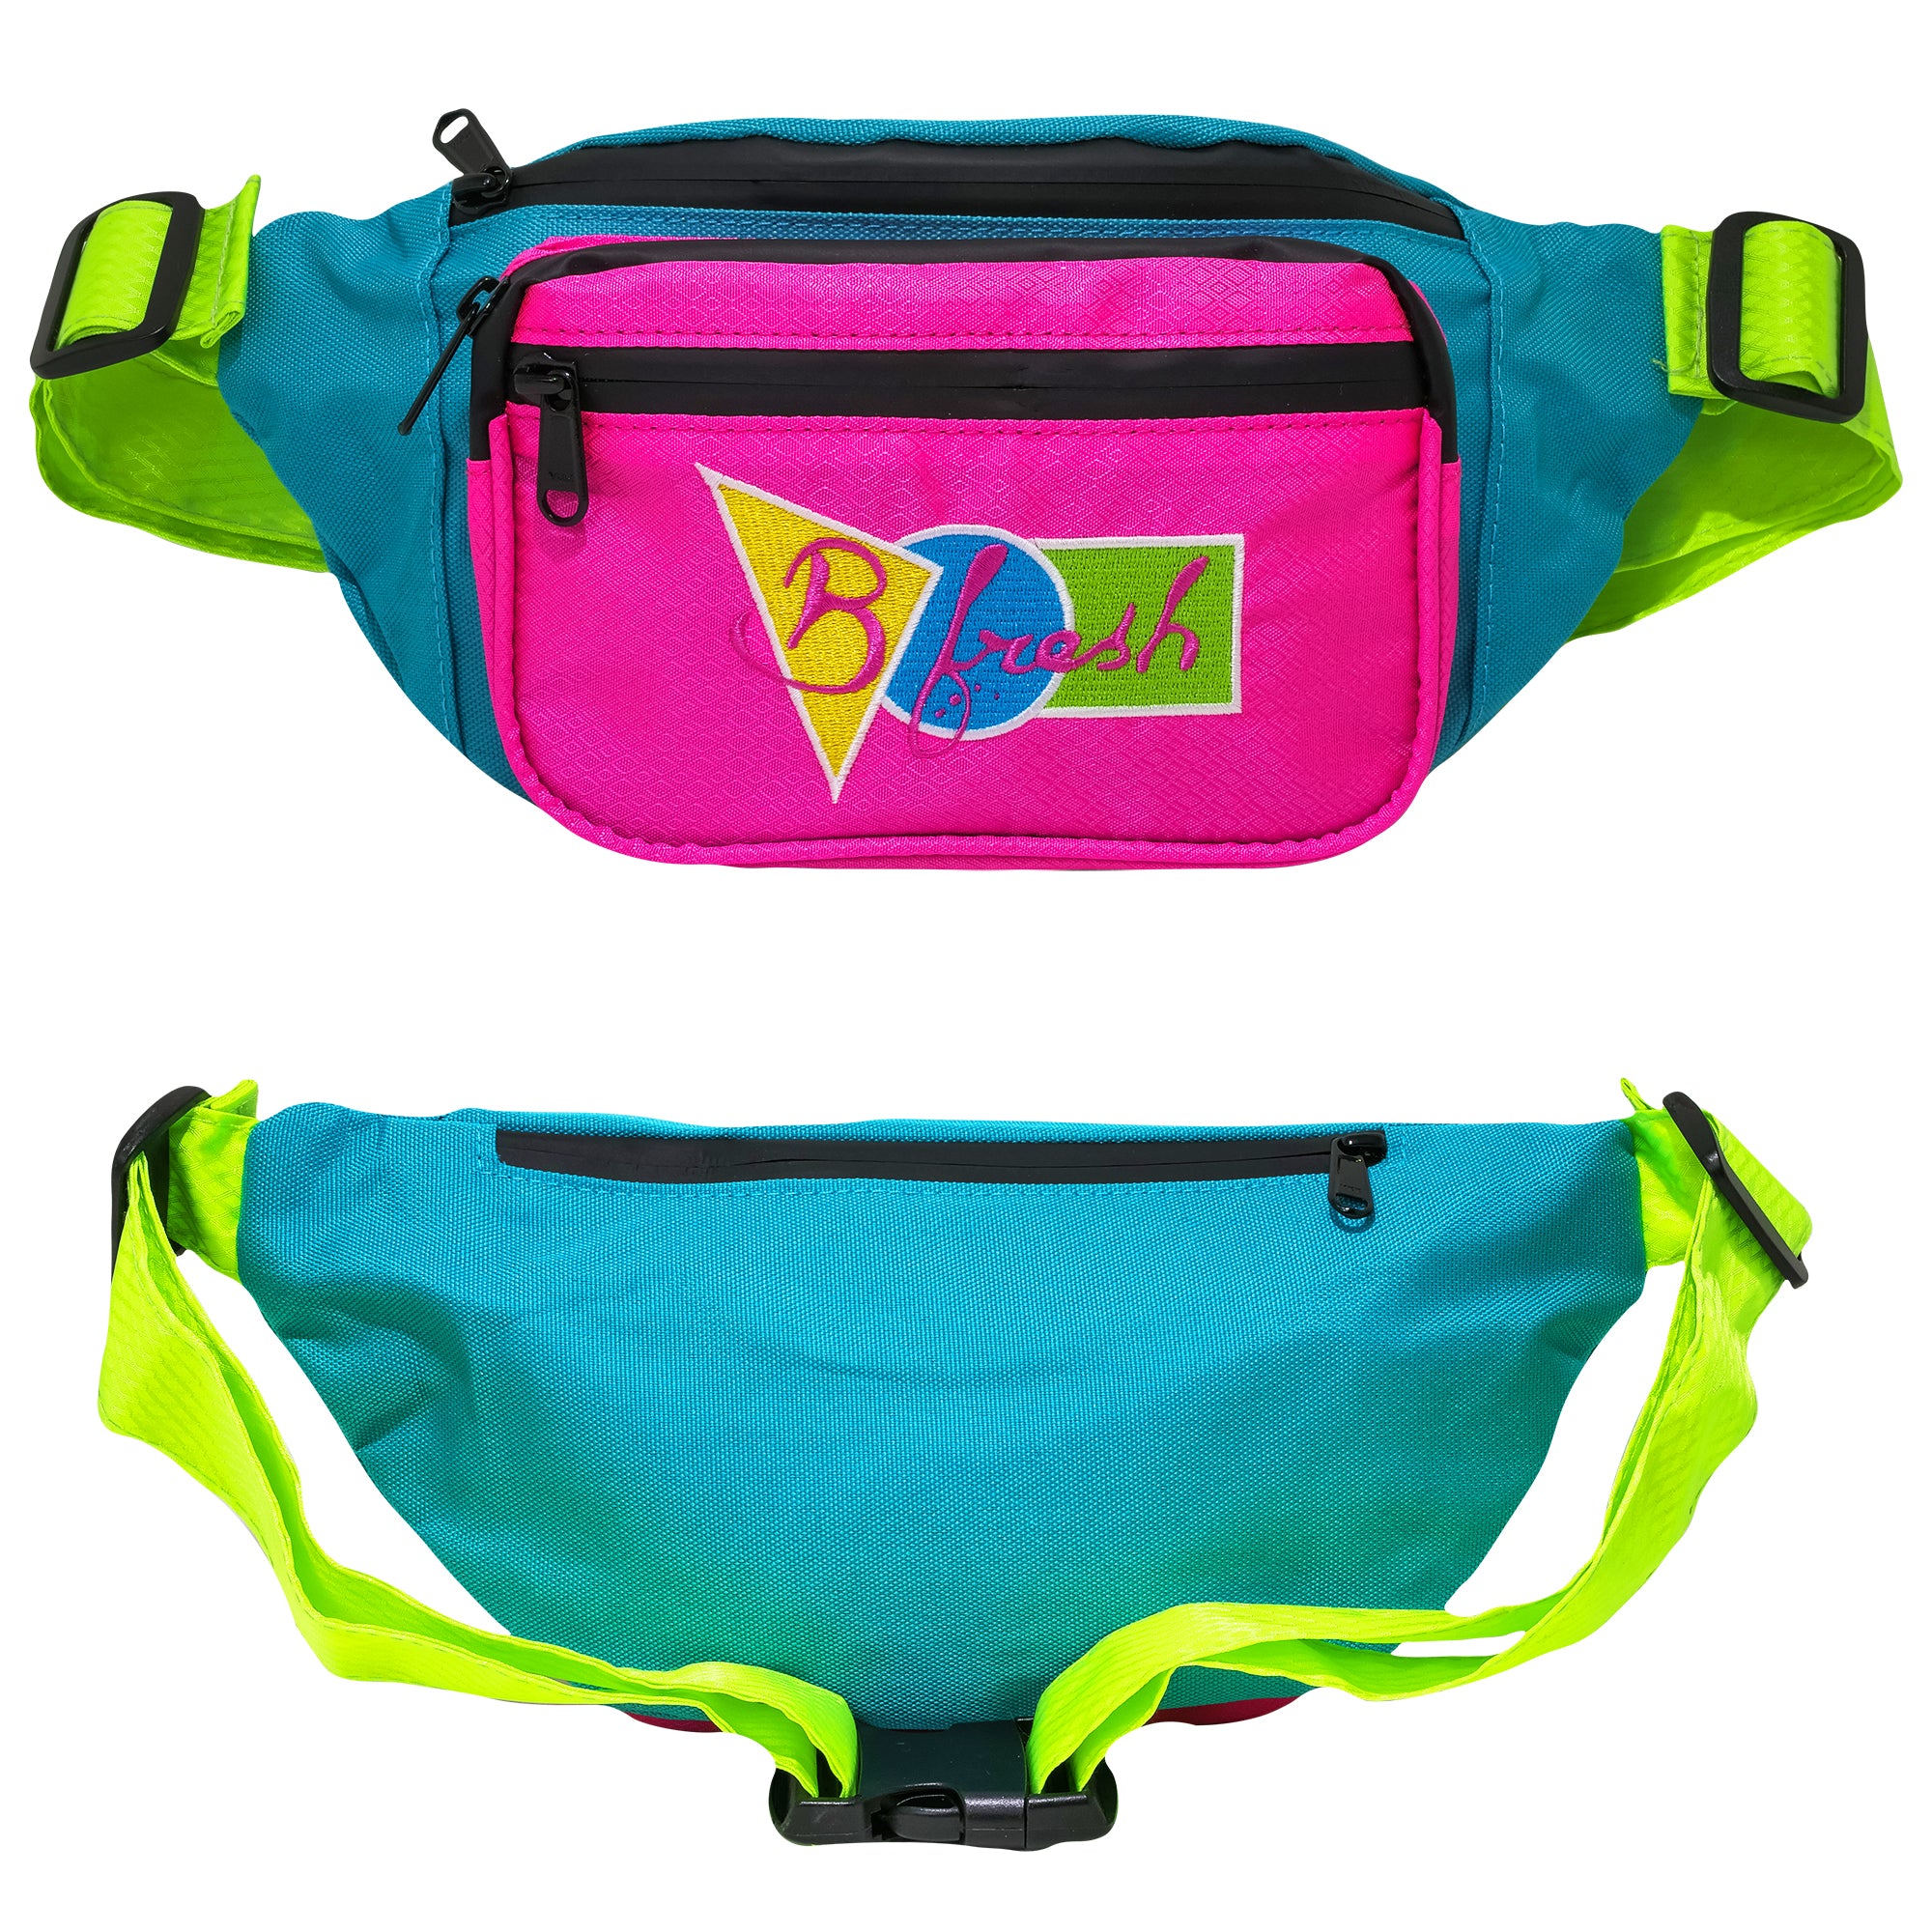 Saved By The.. Water Resistant Fanny Pack bum bag with water proof material water resistant zippers. Retro old school vintage saved by the bell inspired fanny pack bag. Bright pink blue and green throwback design. B Fresh Gear